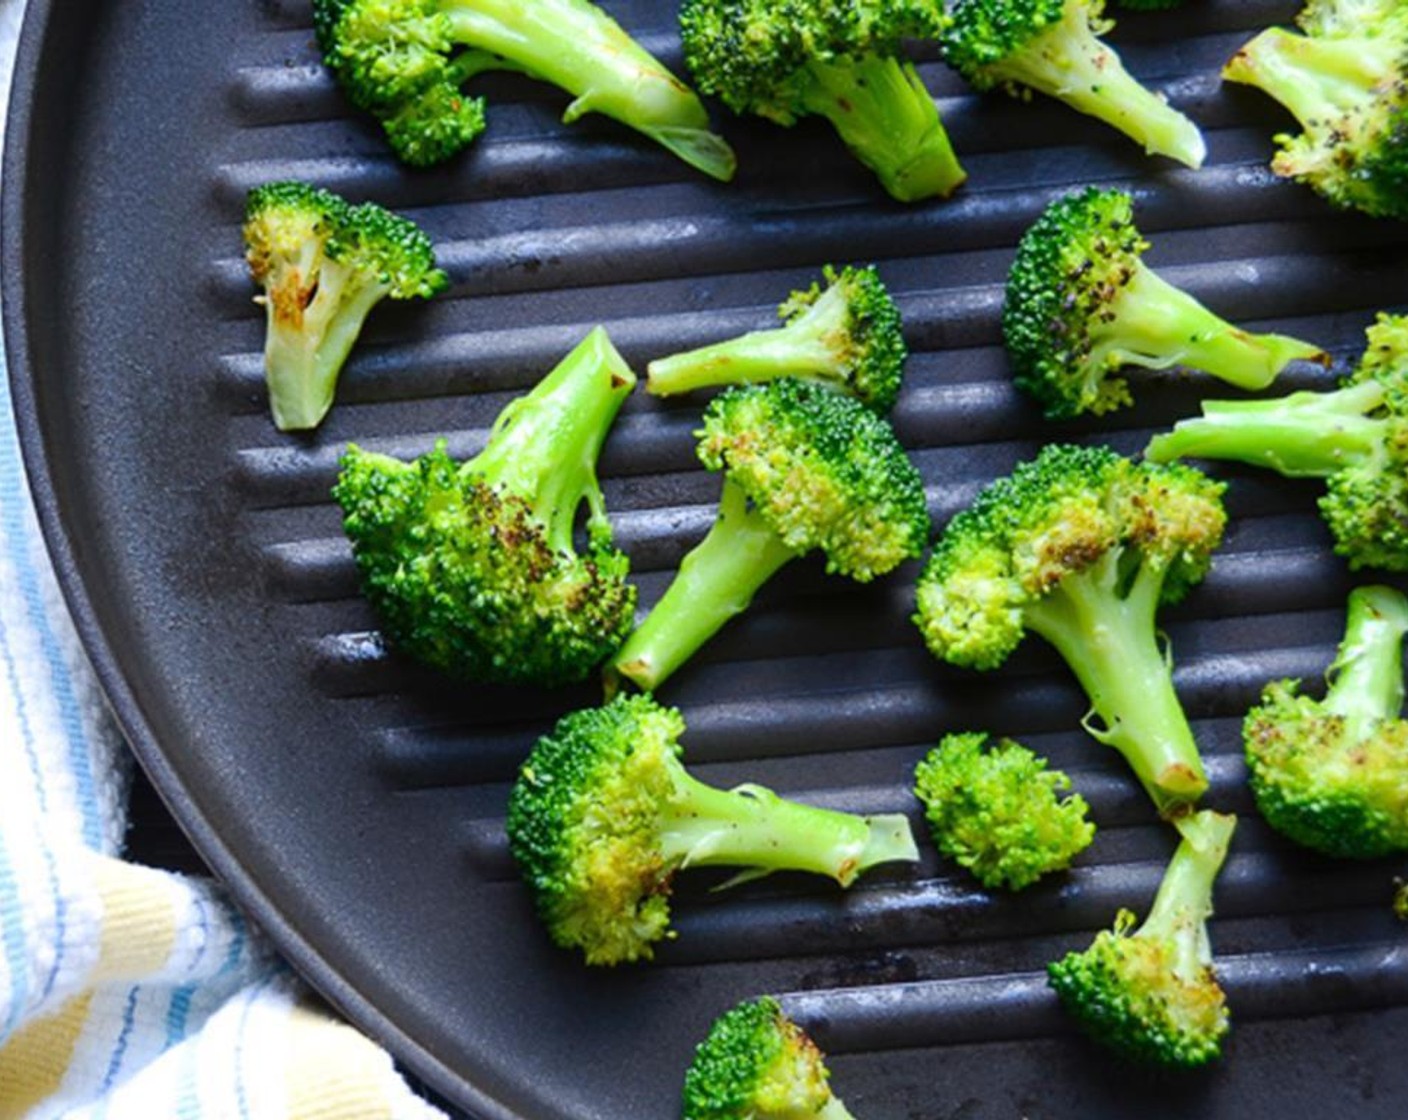 step 7 Place a ridged grill pan on the stove and heat it over medium high heat until very hot. Add the broccoli in two to three different batches so you don't crowd the pan.  Cook in the hot pan until you get the telltale grill marks. Transfer to the bowl.